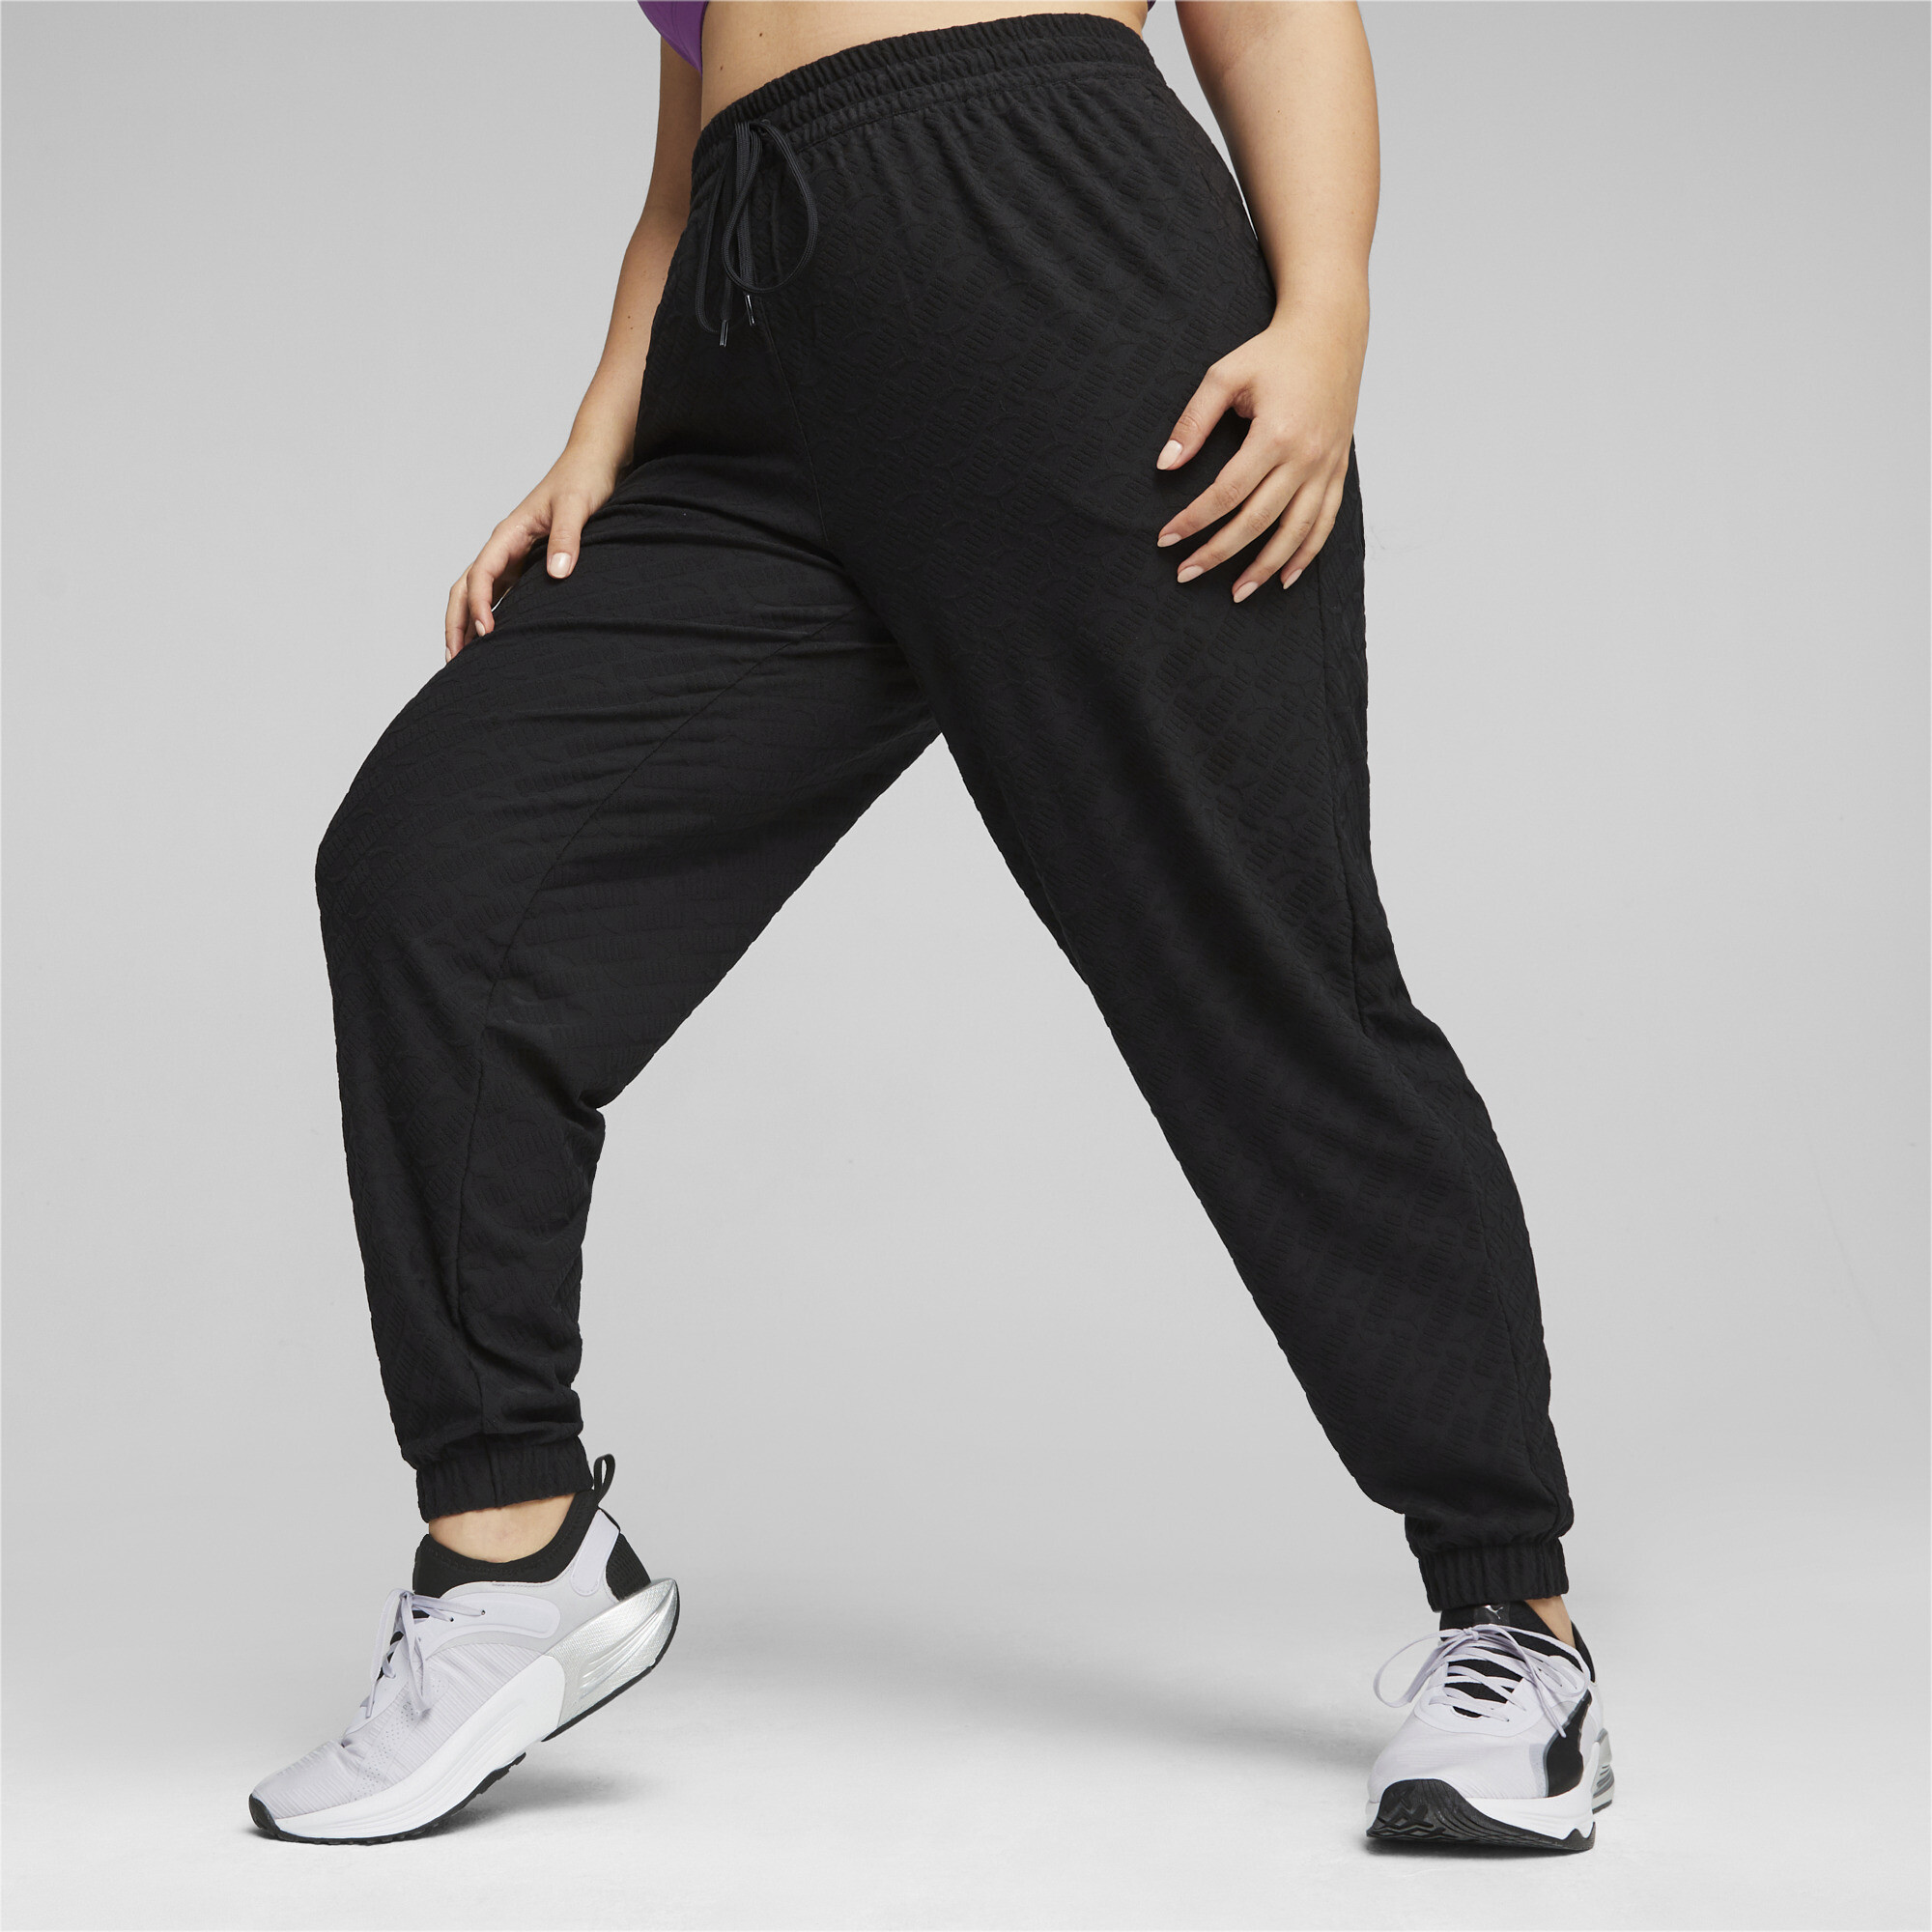 Women's PUMA Fit Training Branded Jogger In Black, Size Small